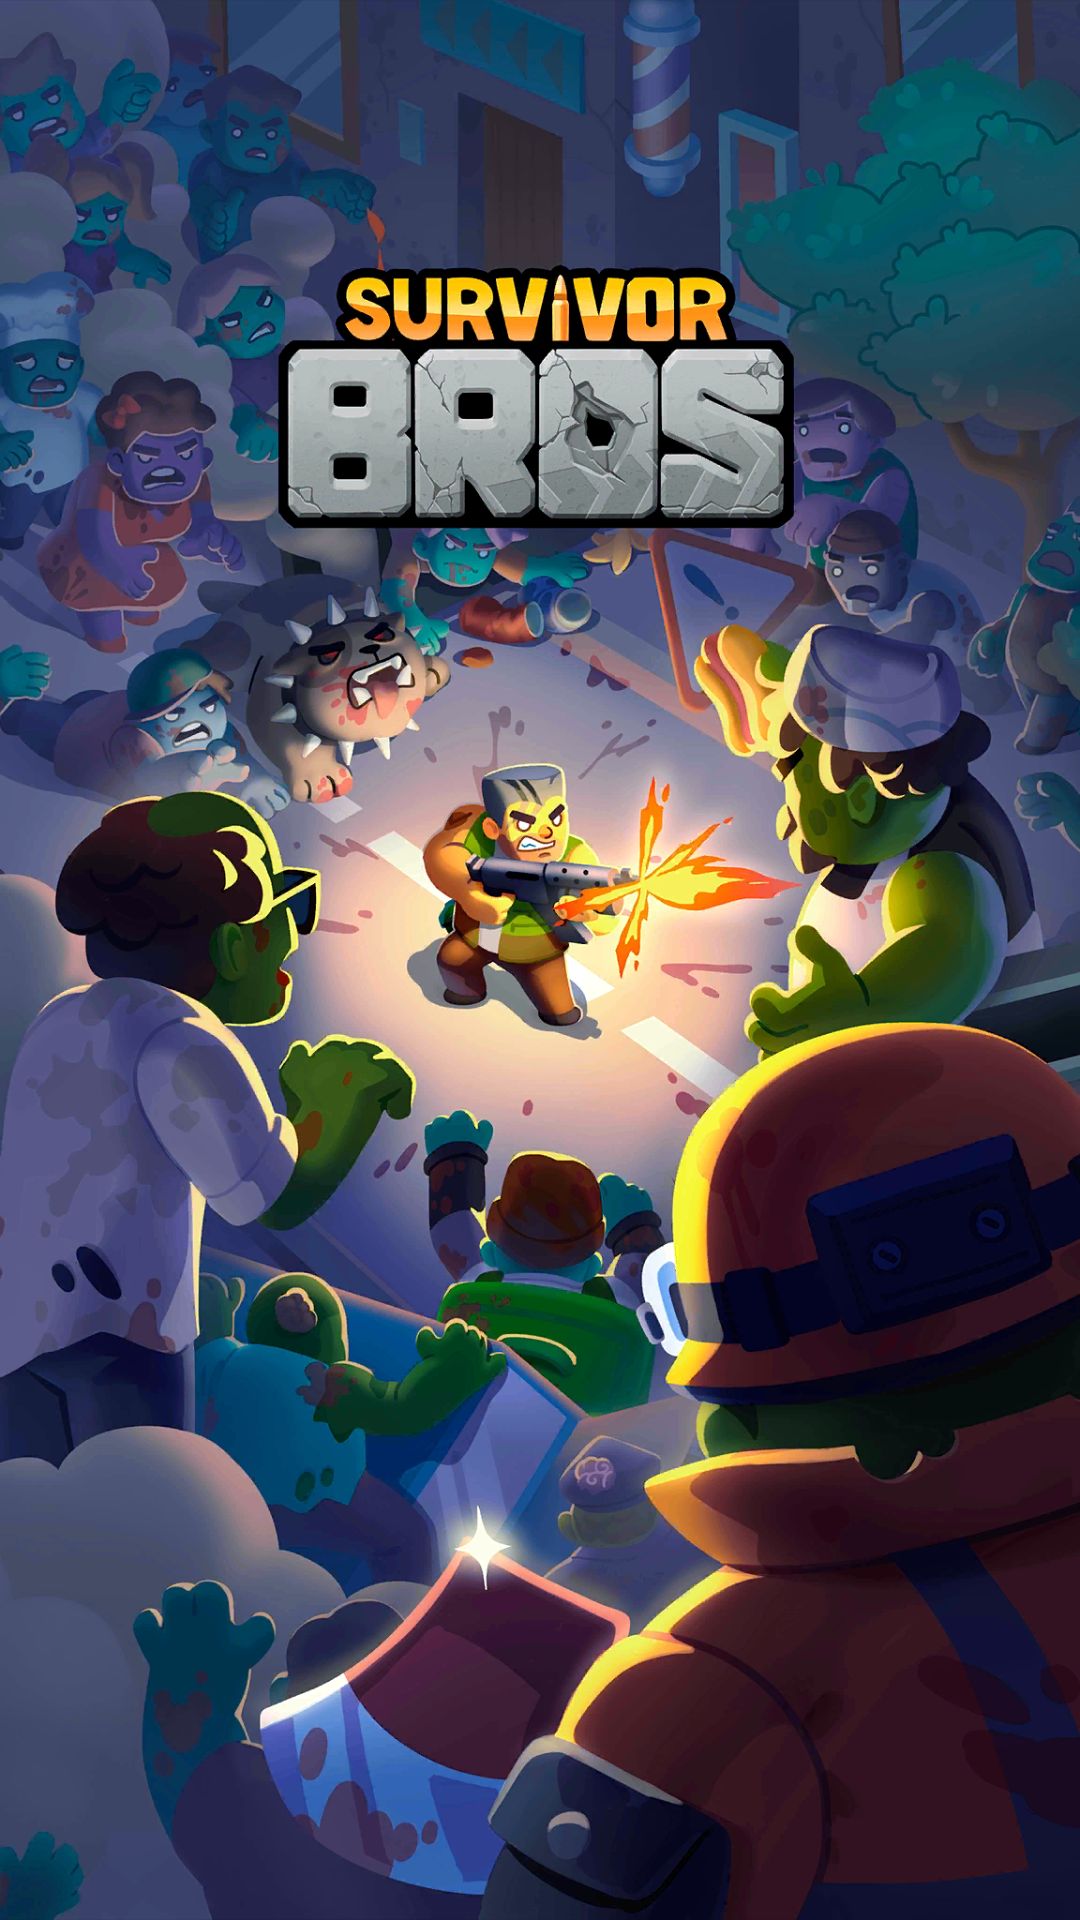 Download Survivor Bros Zombie Roguelike Android free game.